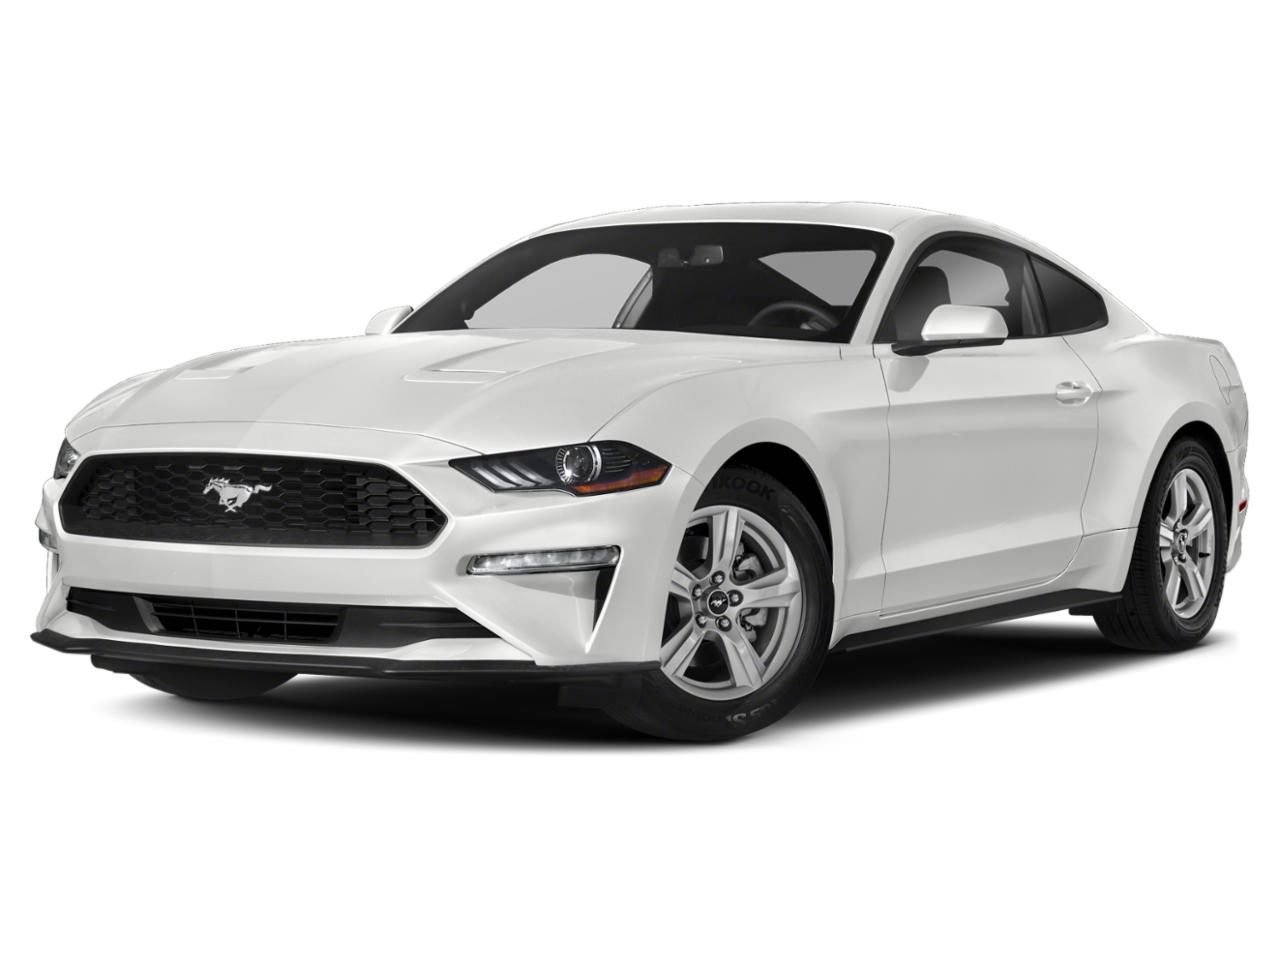 2018 Ford Mustang Vehicle Photo in MORGANTOWN, WV 26501-2421